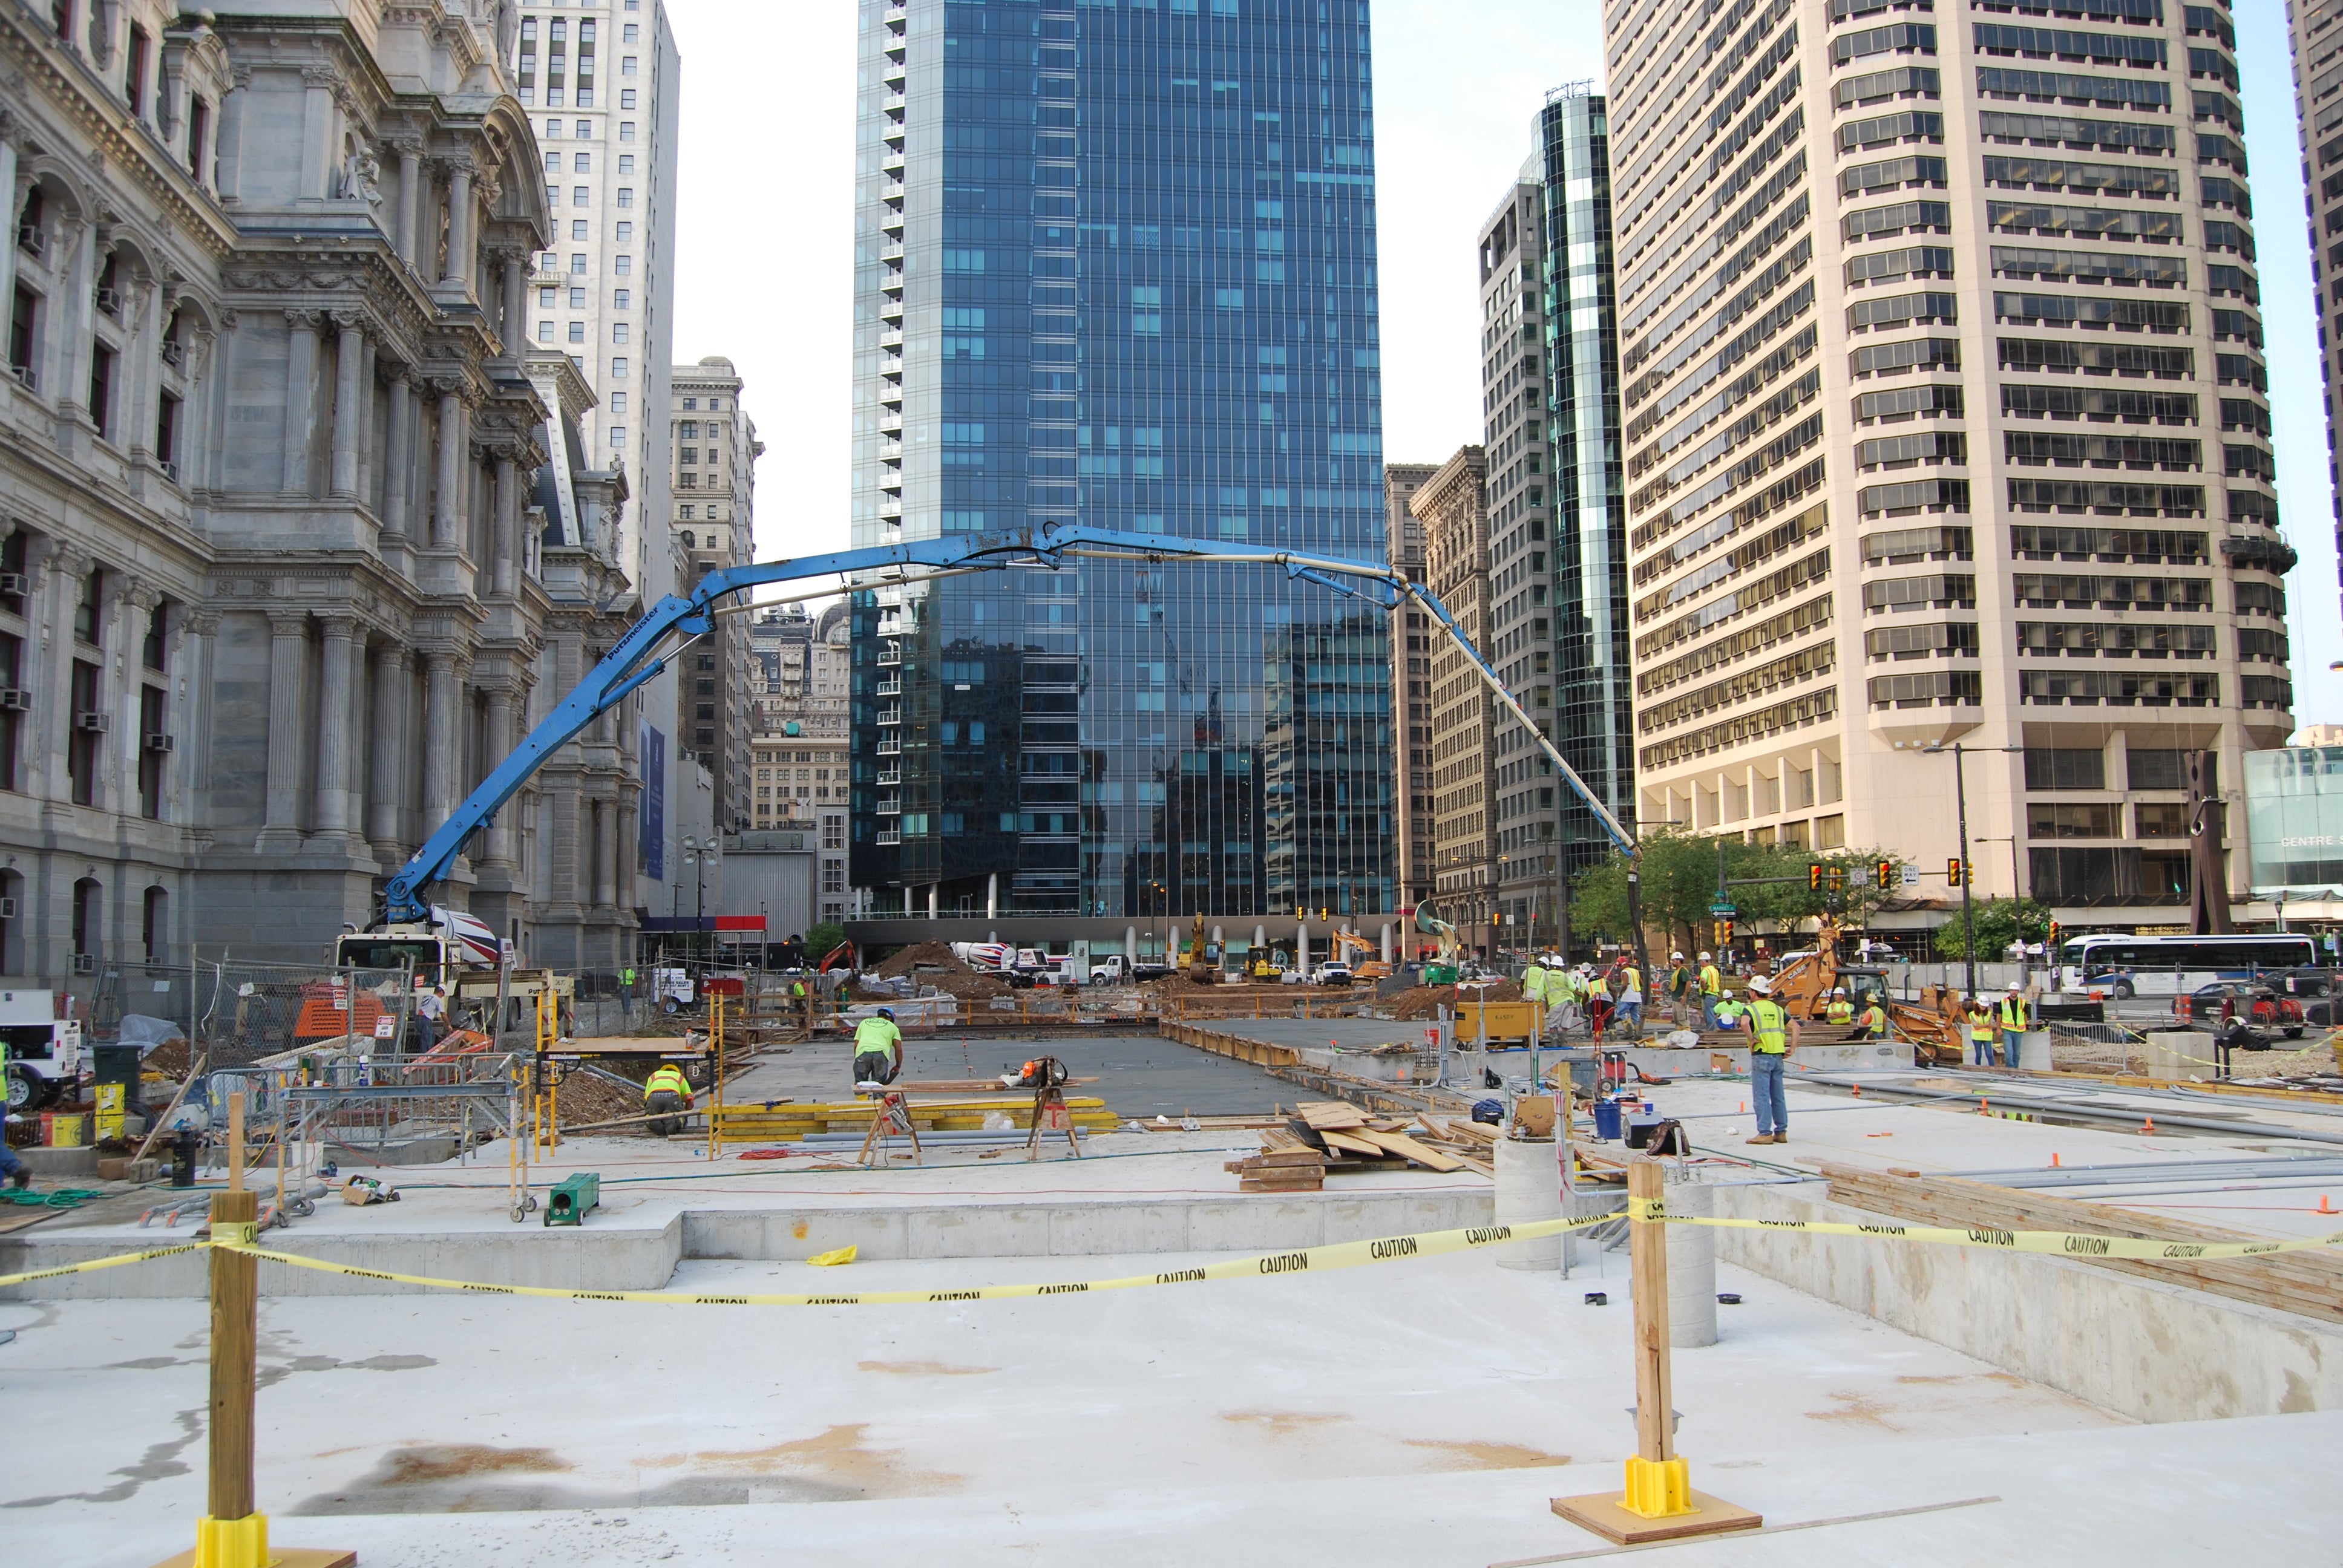 Dilworth Plaza should be completed in the fall of 2014. Photo courtesy of Center City District